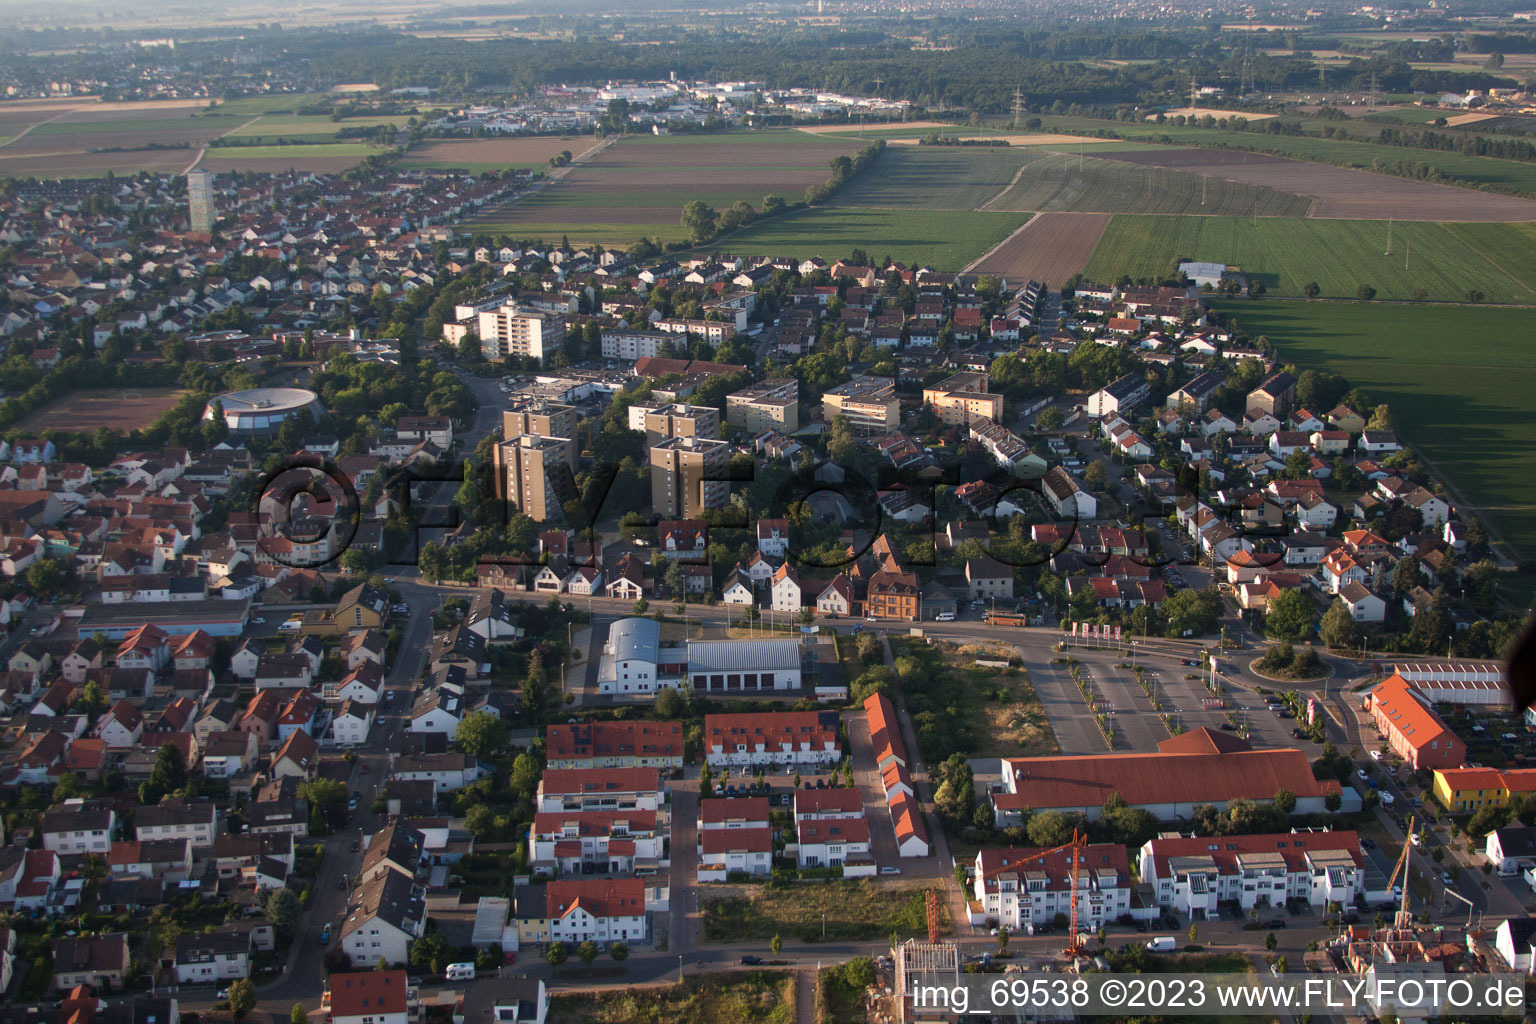 Mutterstadt in the state Rhineland-Palatinate, Germany from the drone perspective